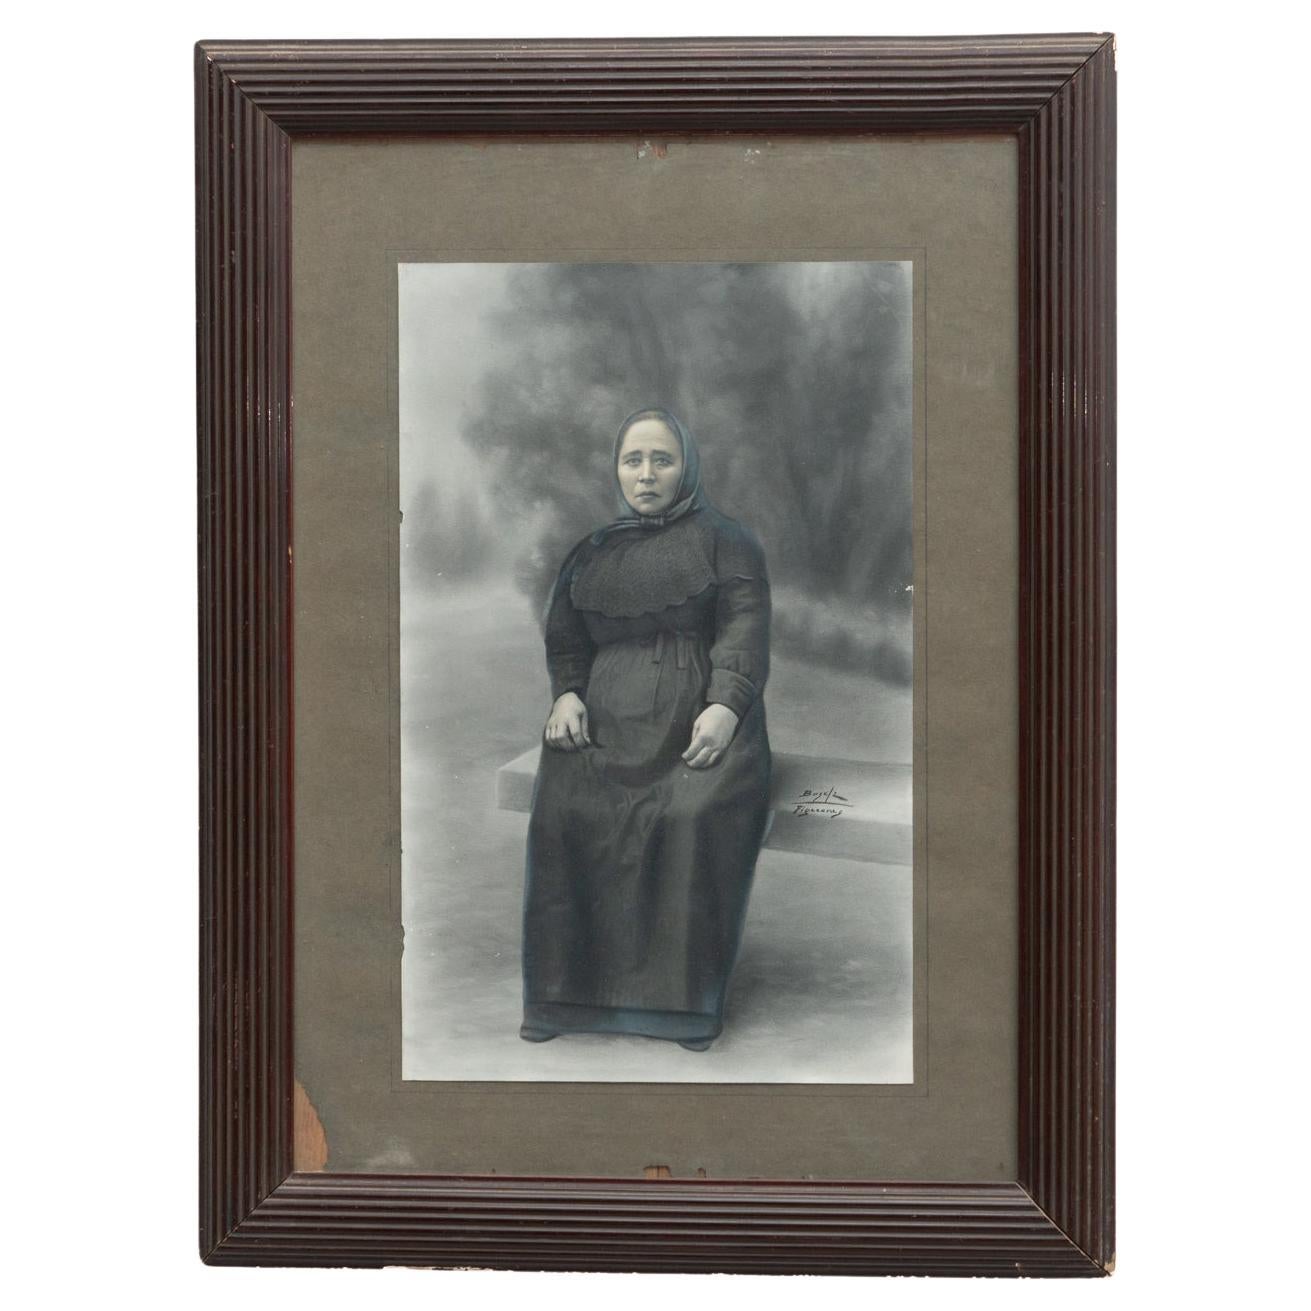 Framed Vintage Photography by Unknown Artist, Late 19th Century